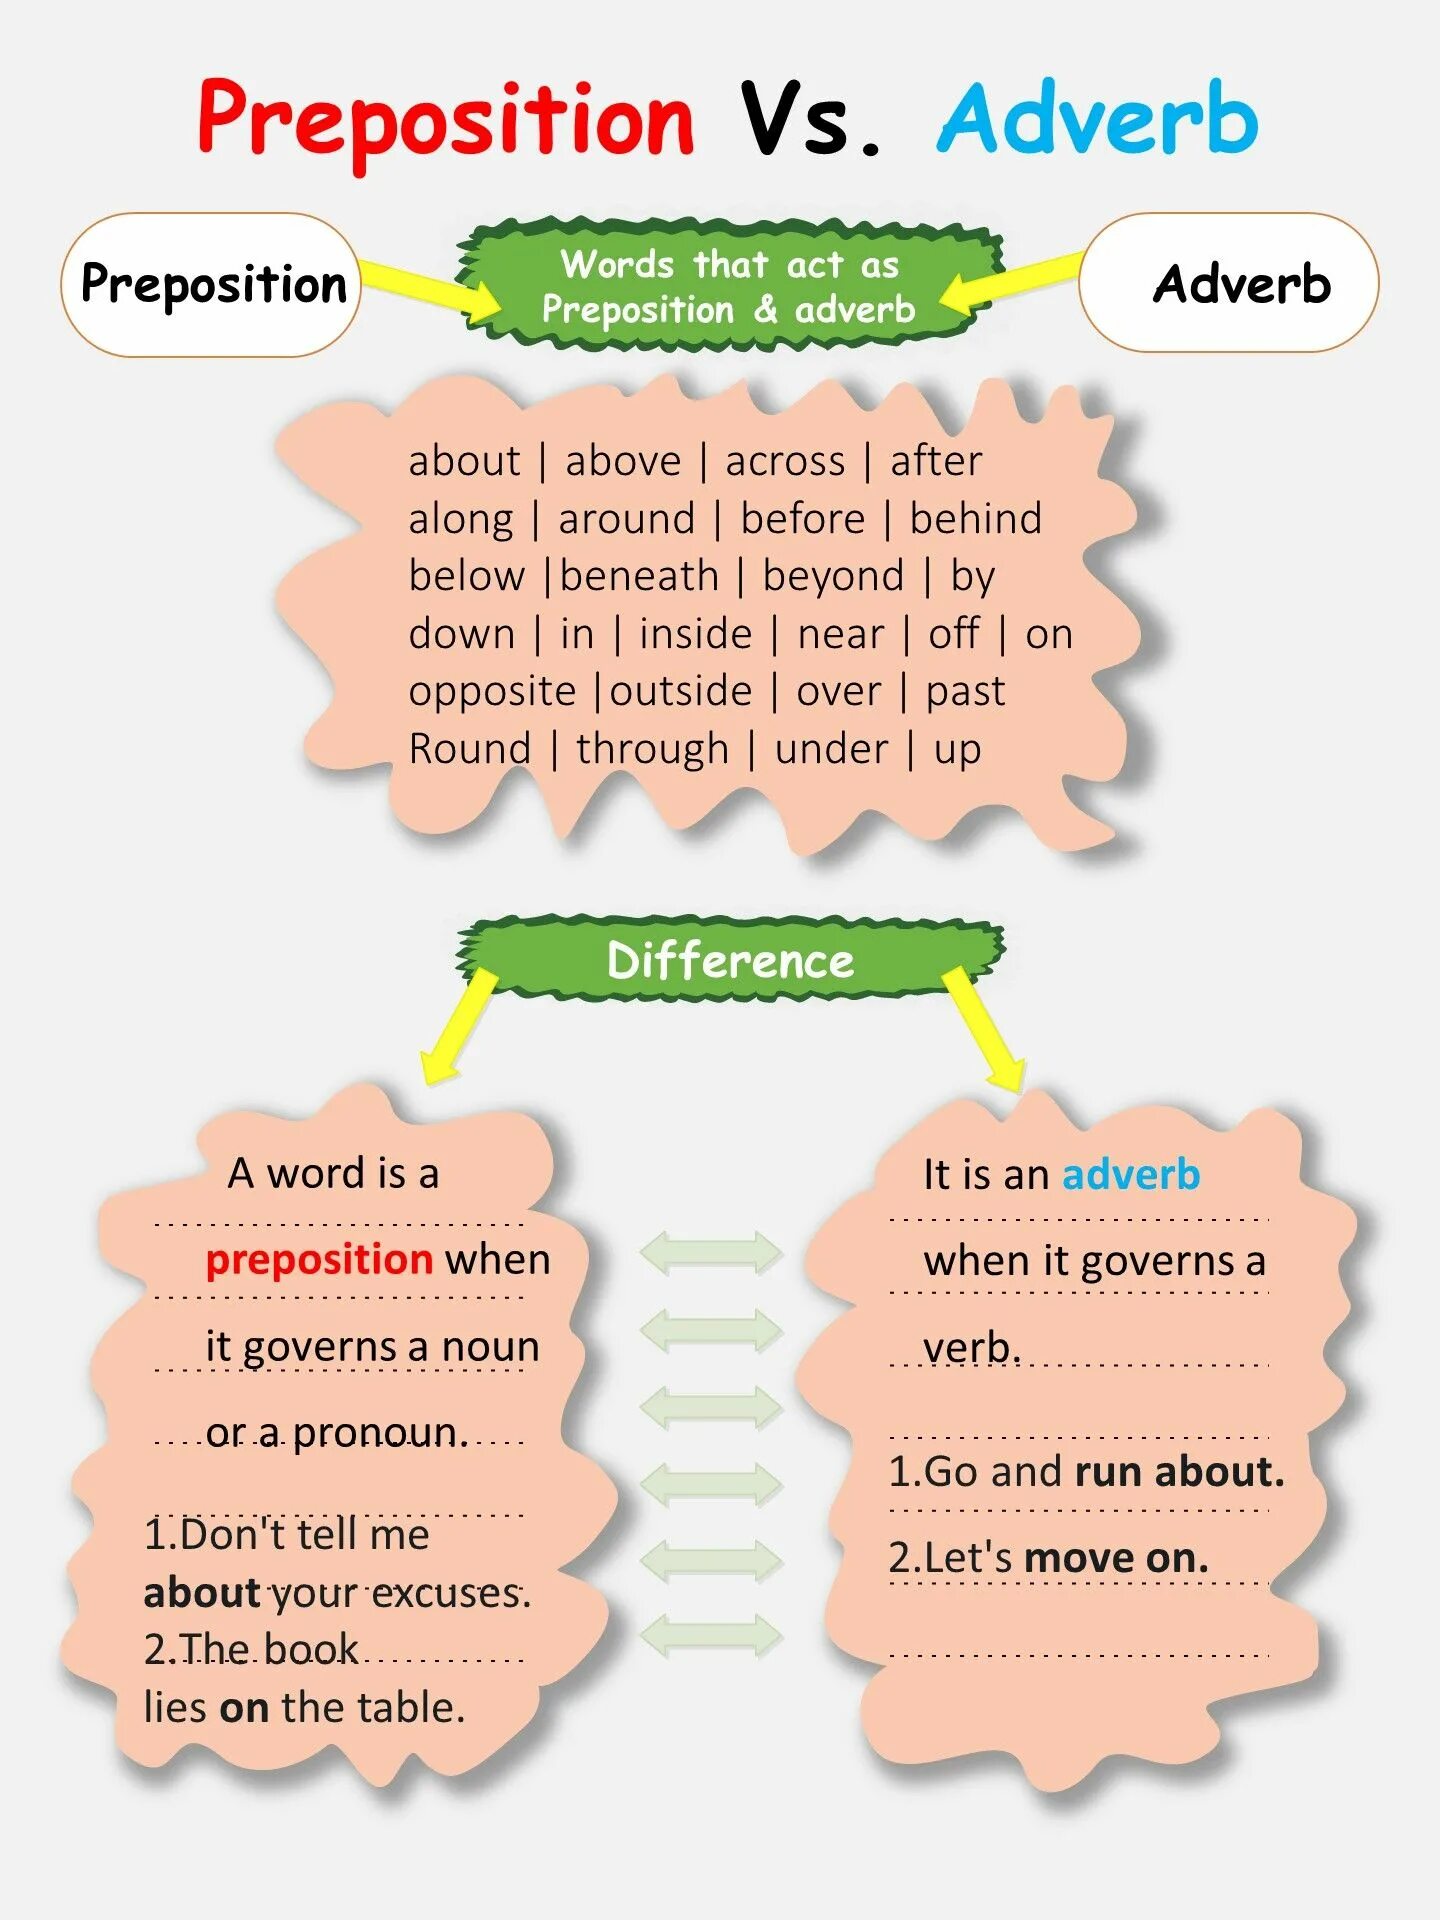 Post verbal adverbs. Prepositions and adverbs. Adverb phrase в английском языке. Prepositions/adverbs в английском. Adverbial and Prepositional phrases.